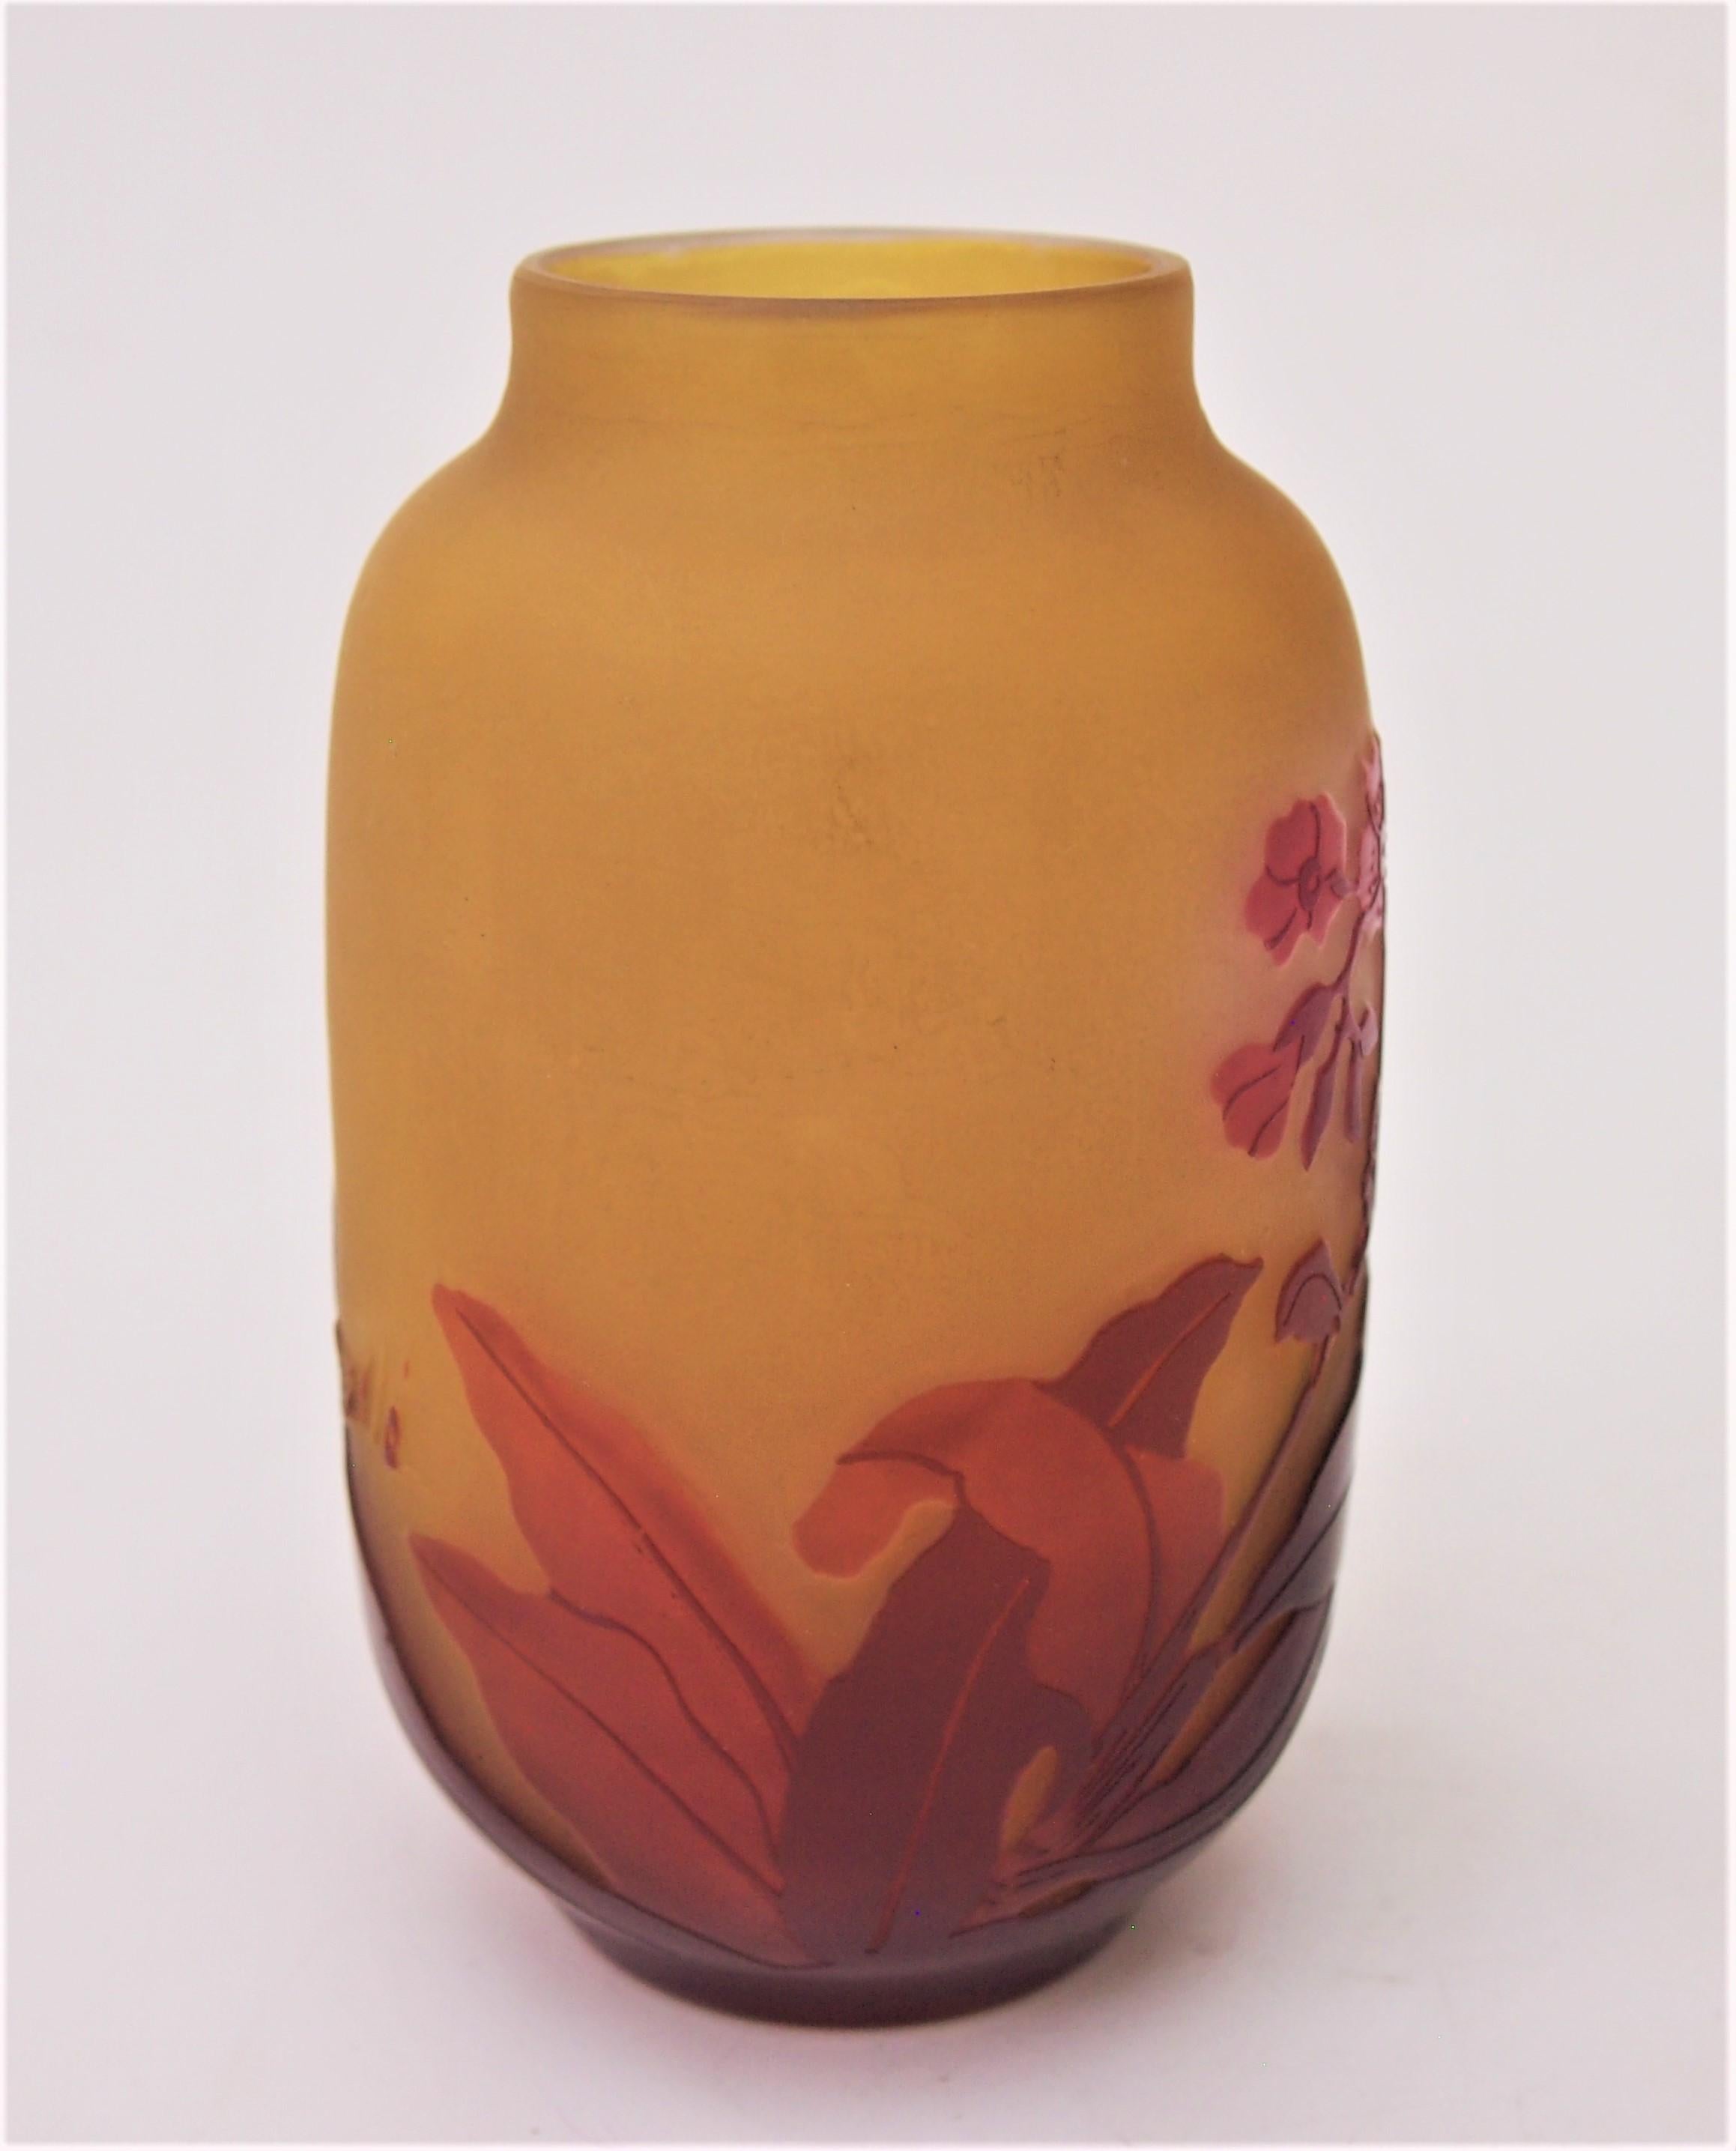 French Art Nouveau Red/Yellow Small Signed Emile Gallé Cameo Glass Vase c1920 In Good Condition For Sale In Worcester Park, GB